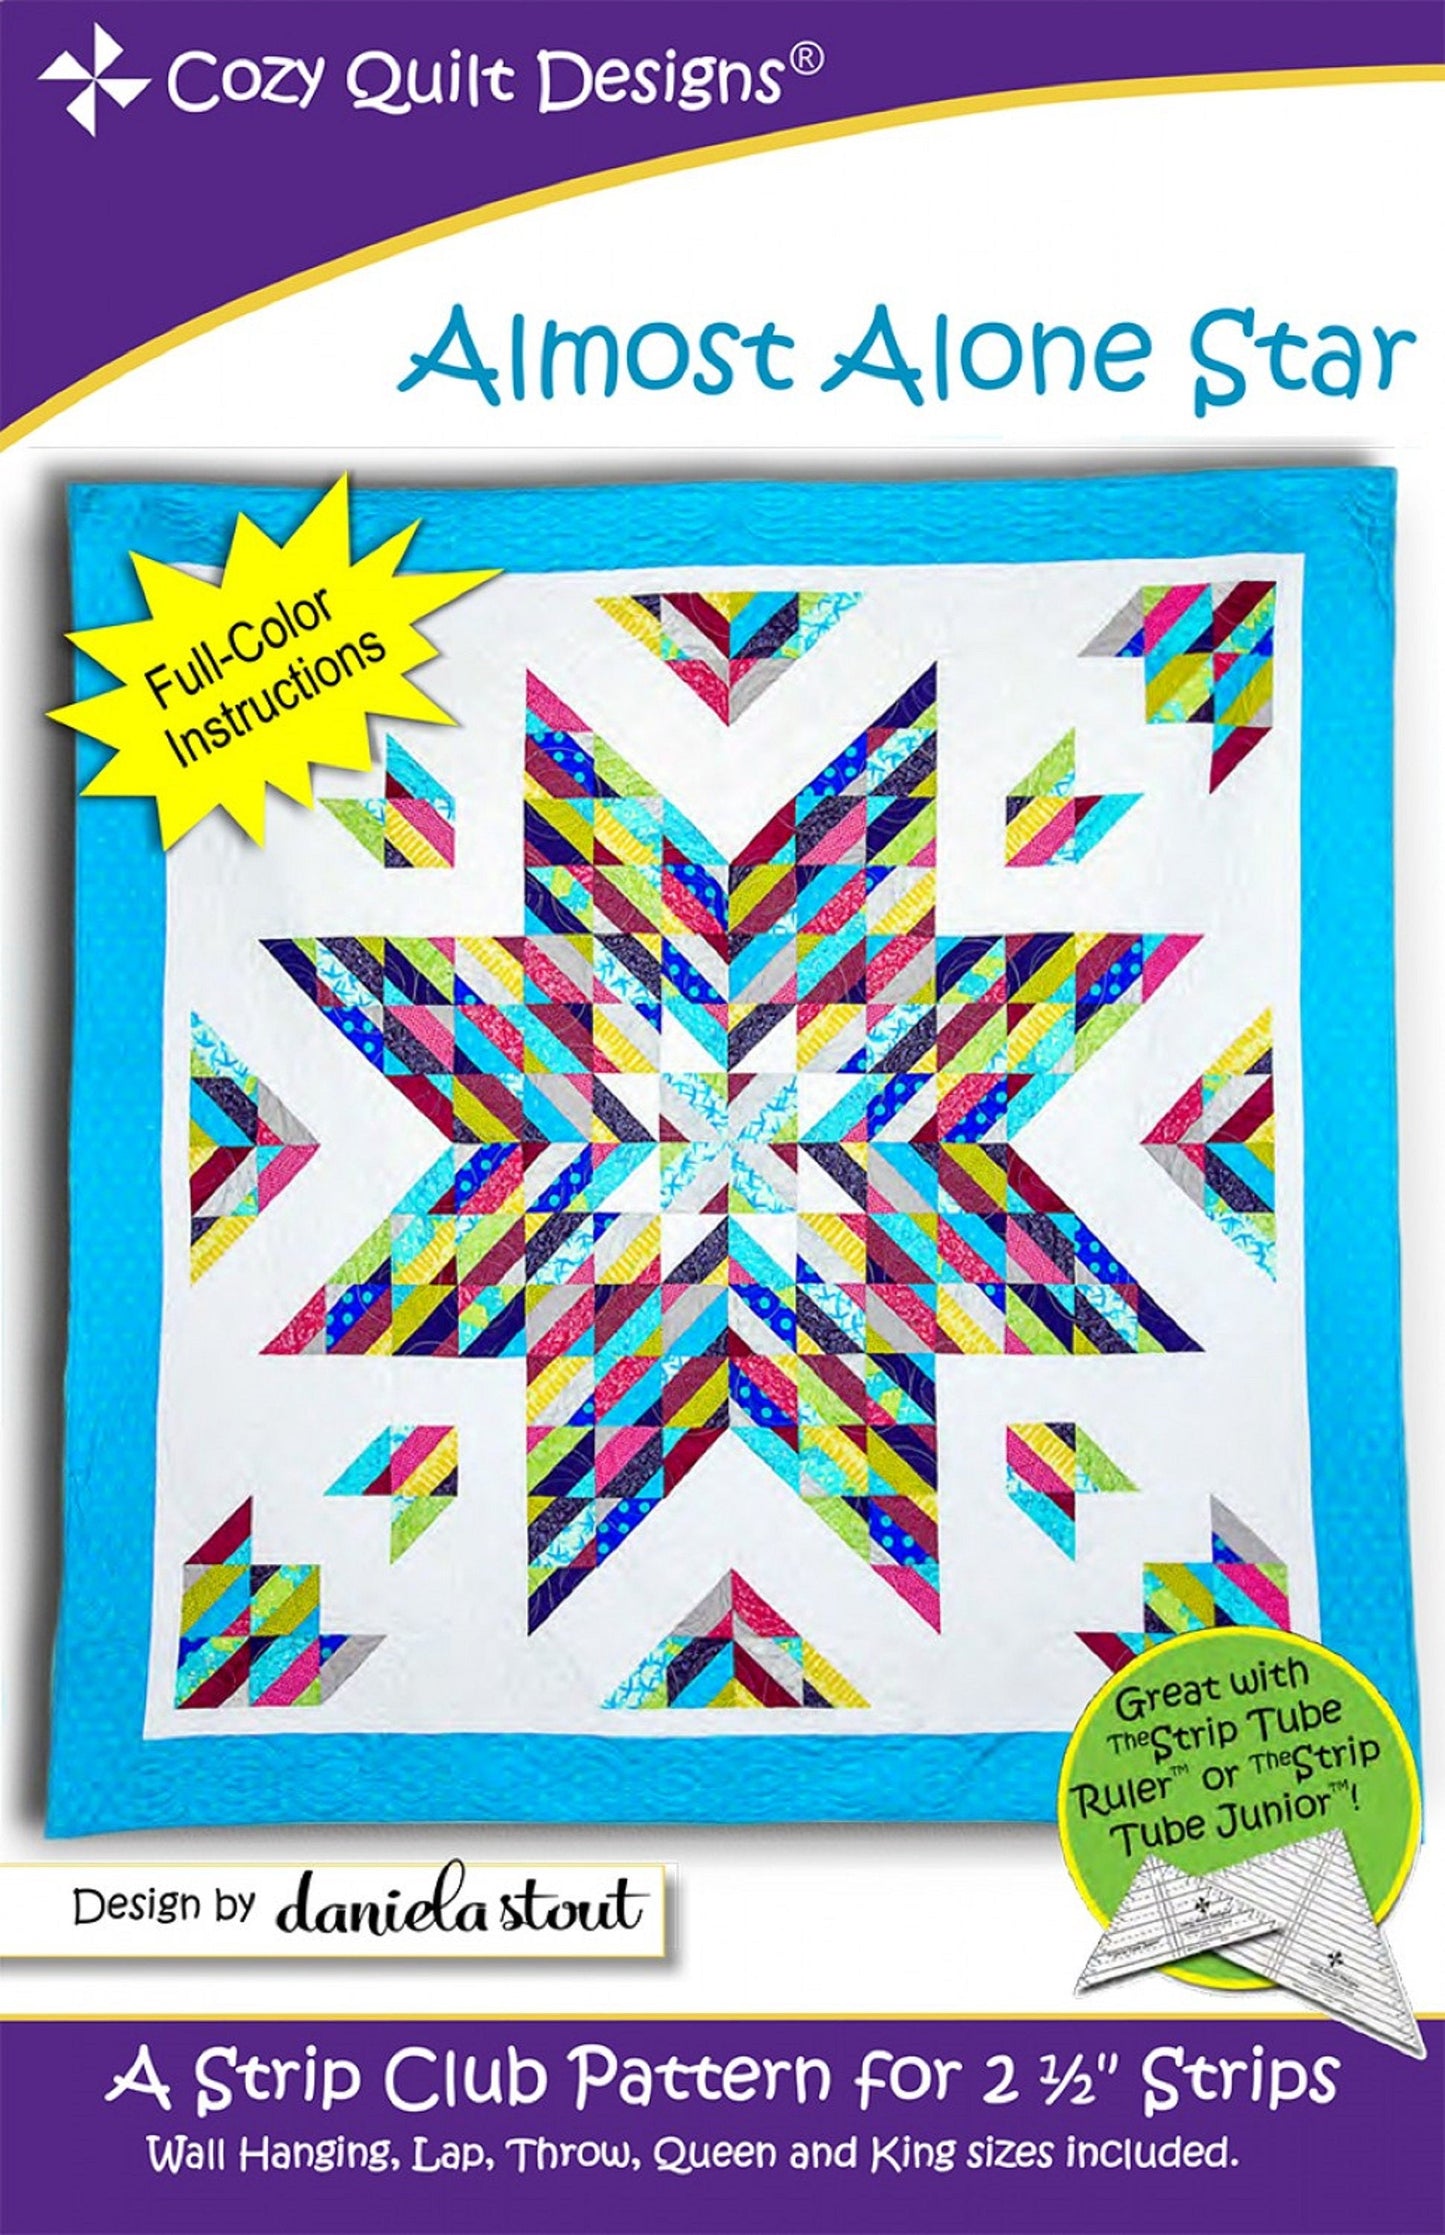 Almost Alone Star Quilt Pattern by Cozy Quilt Designs